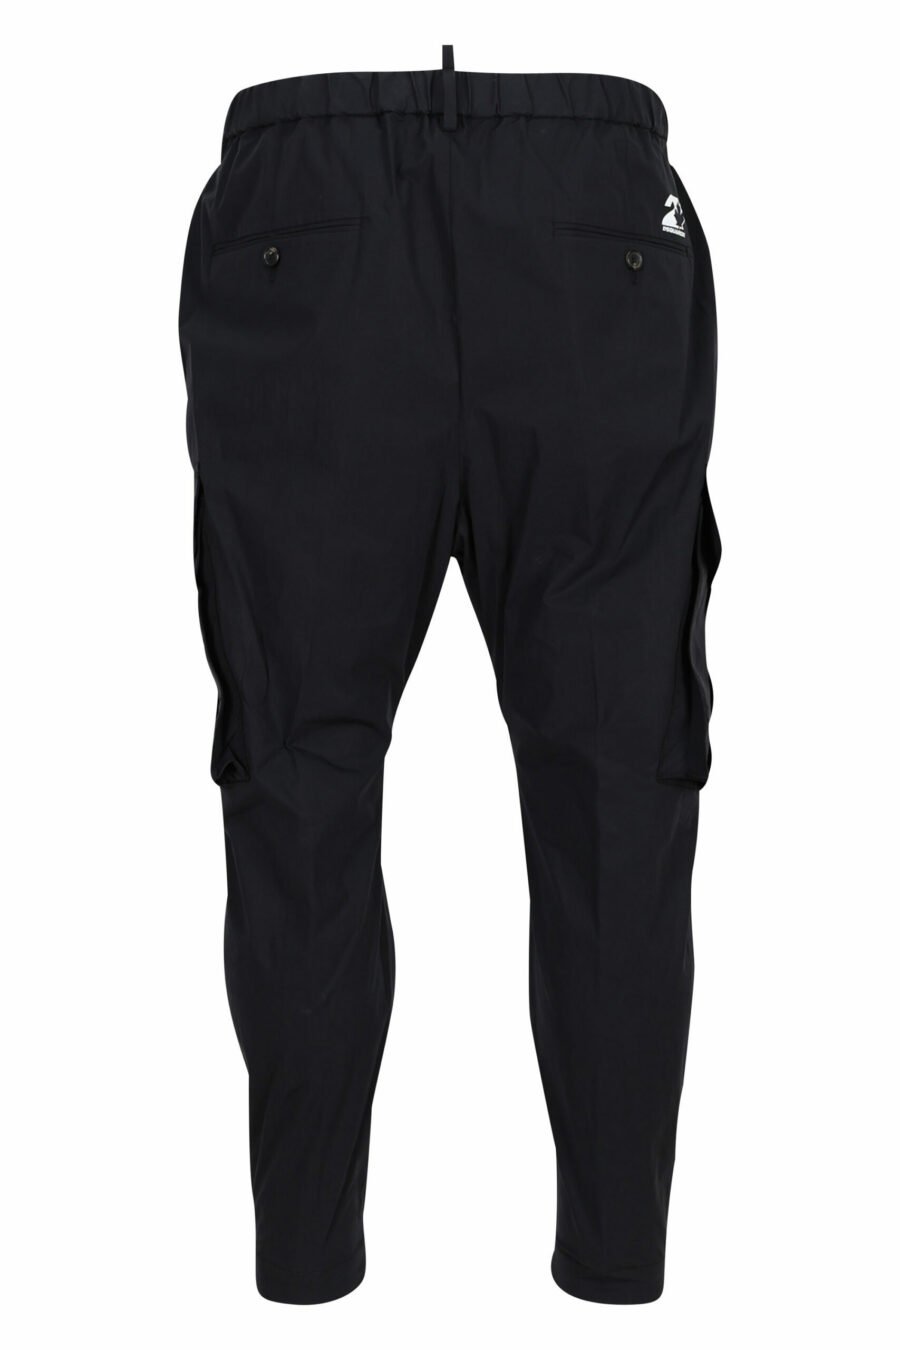 Black pully pant - 8054148060992 2 scaled